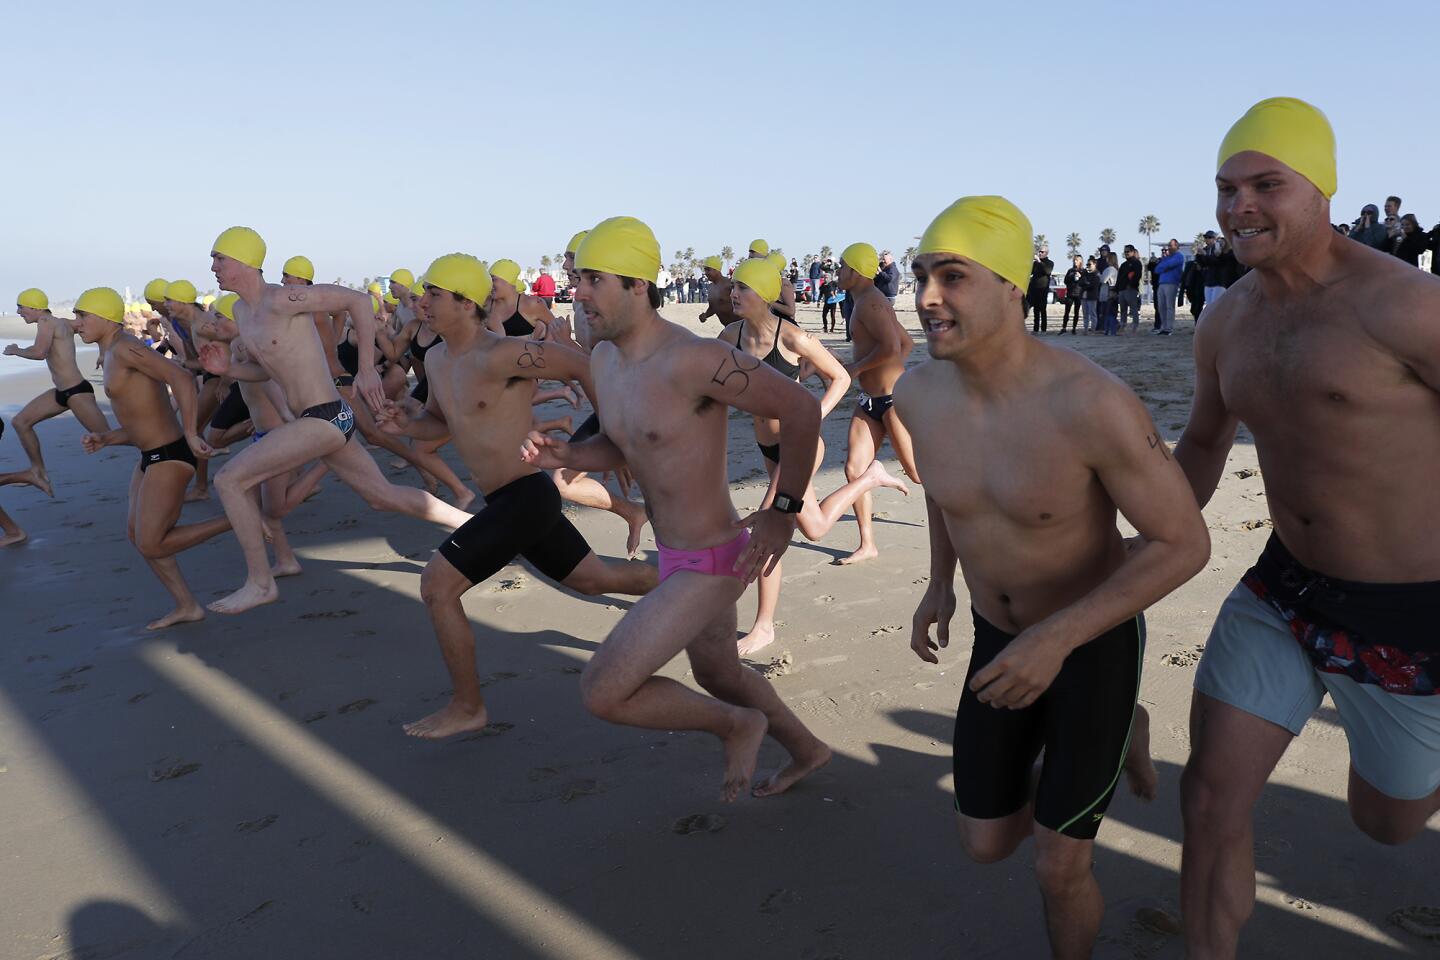 Participants race to the ocean on the north side of the pier as they compete in the 1,000 yard open water swim event during Huntington Beach's lifeguard tryouts on Saturday.